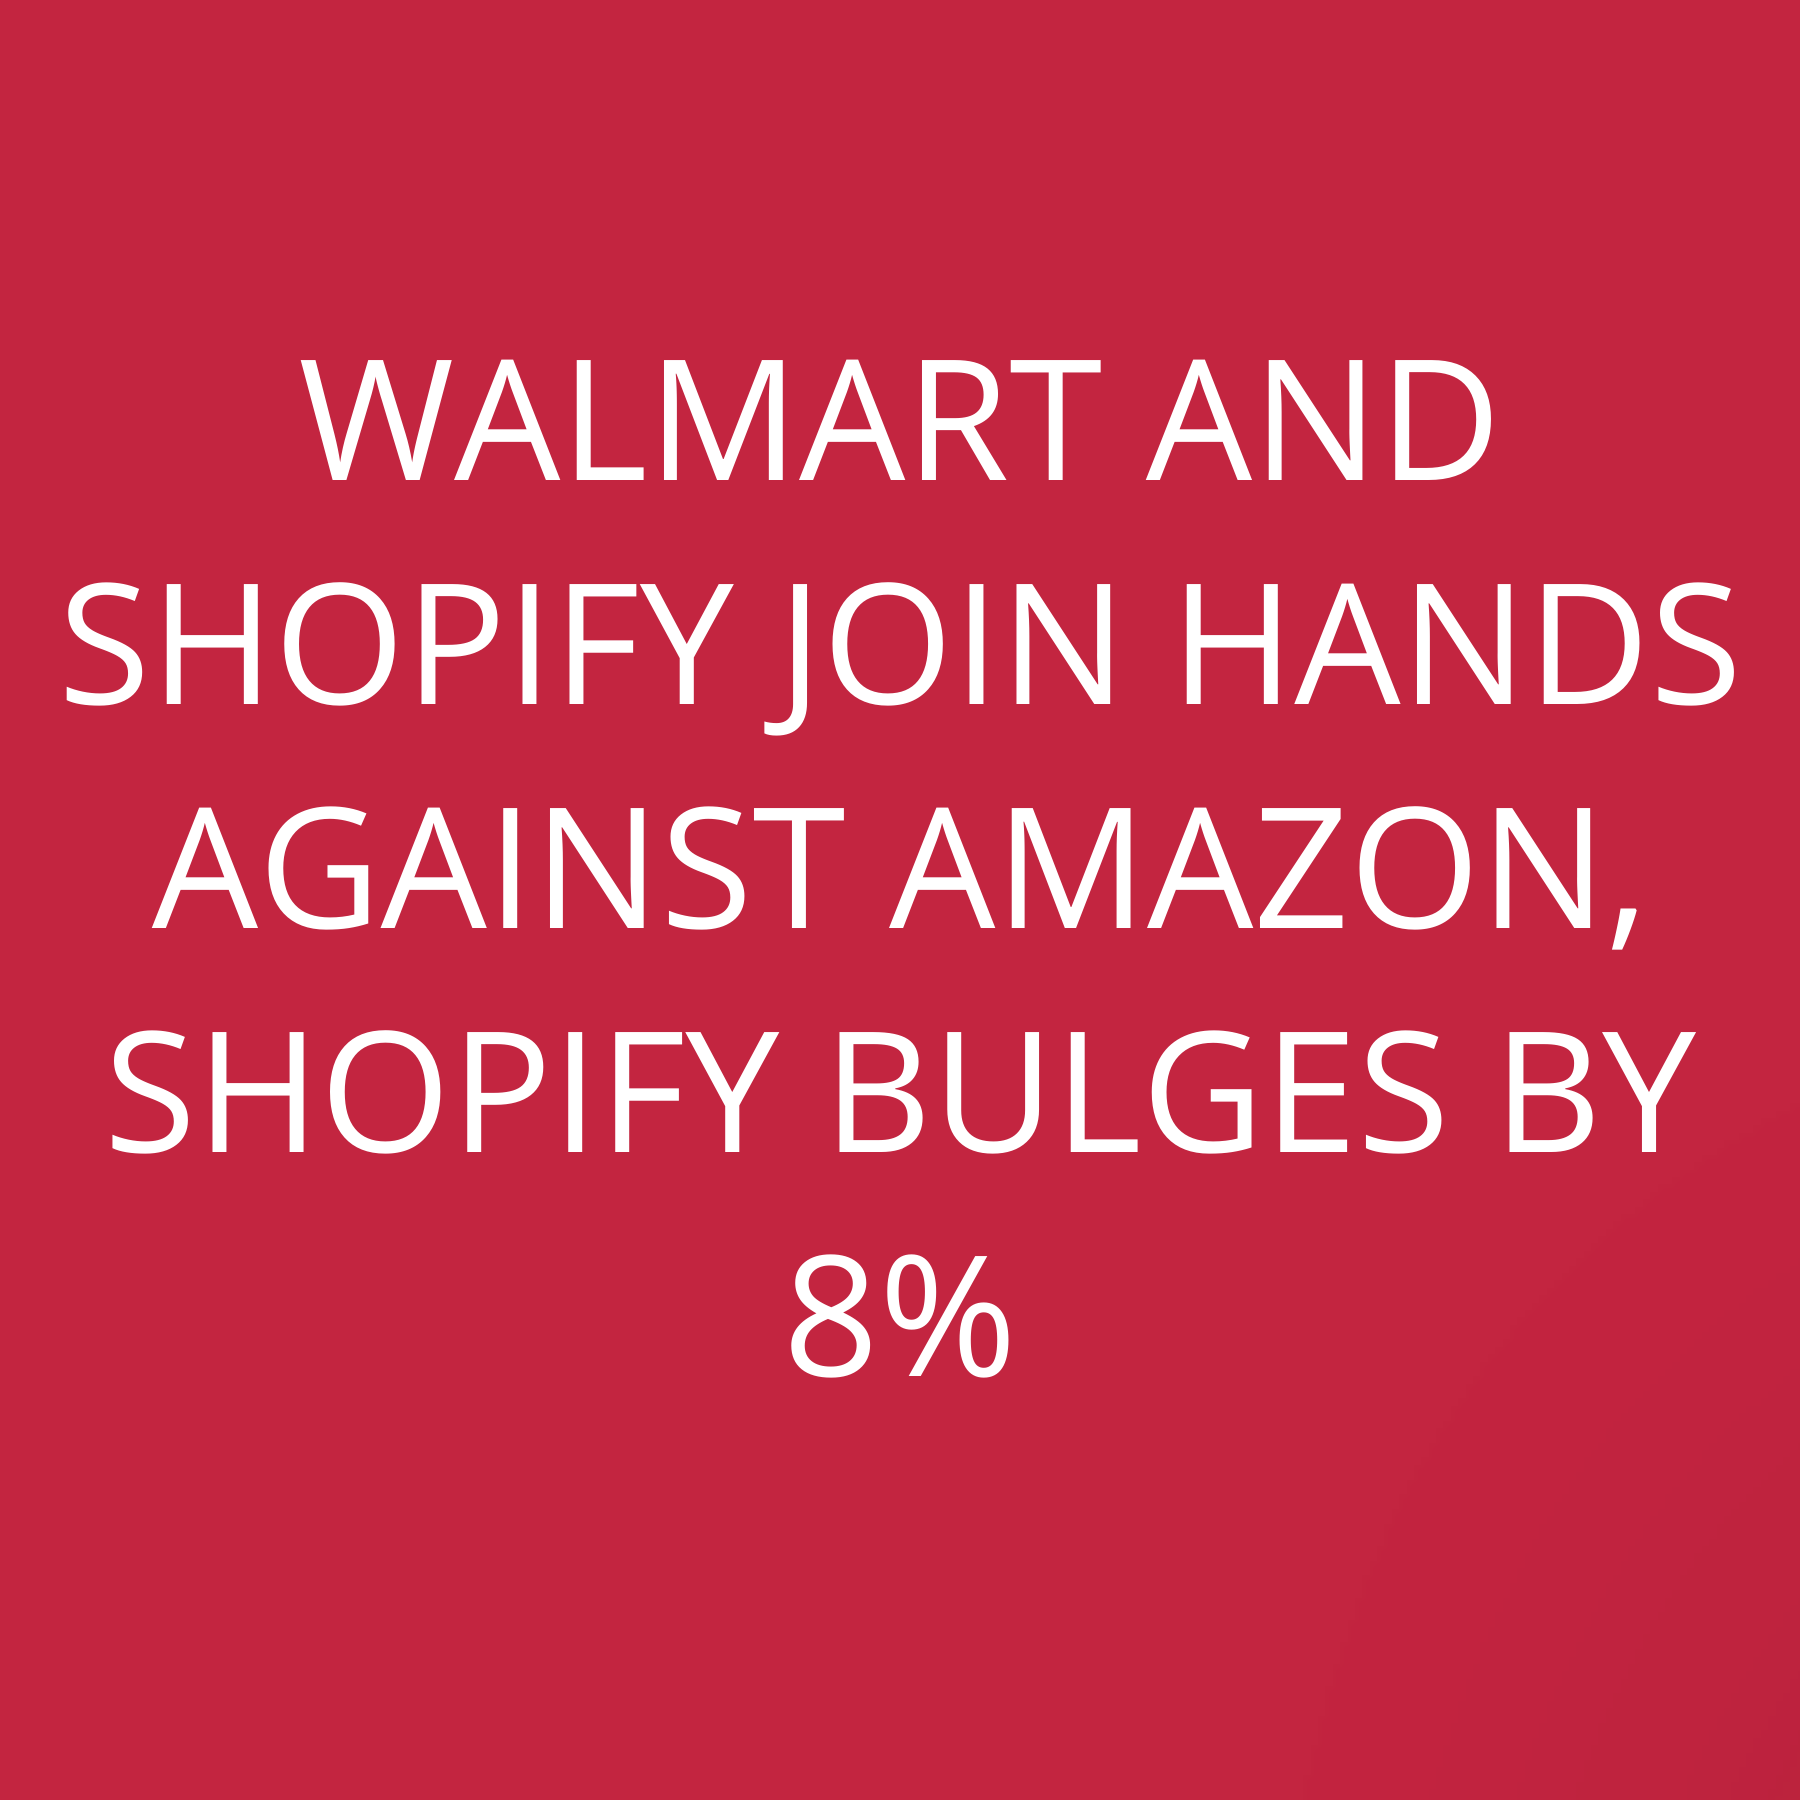 Walmart and Shopify join hands against Amazon, Shopify bulges by 8%